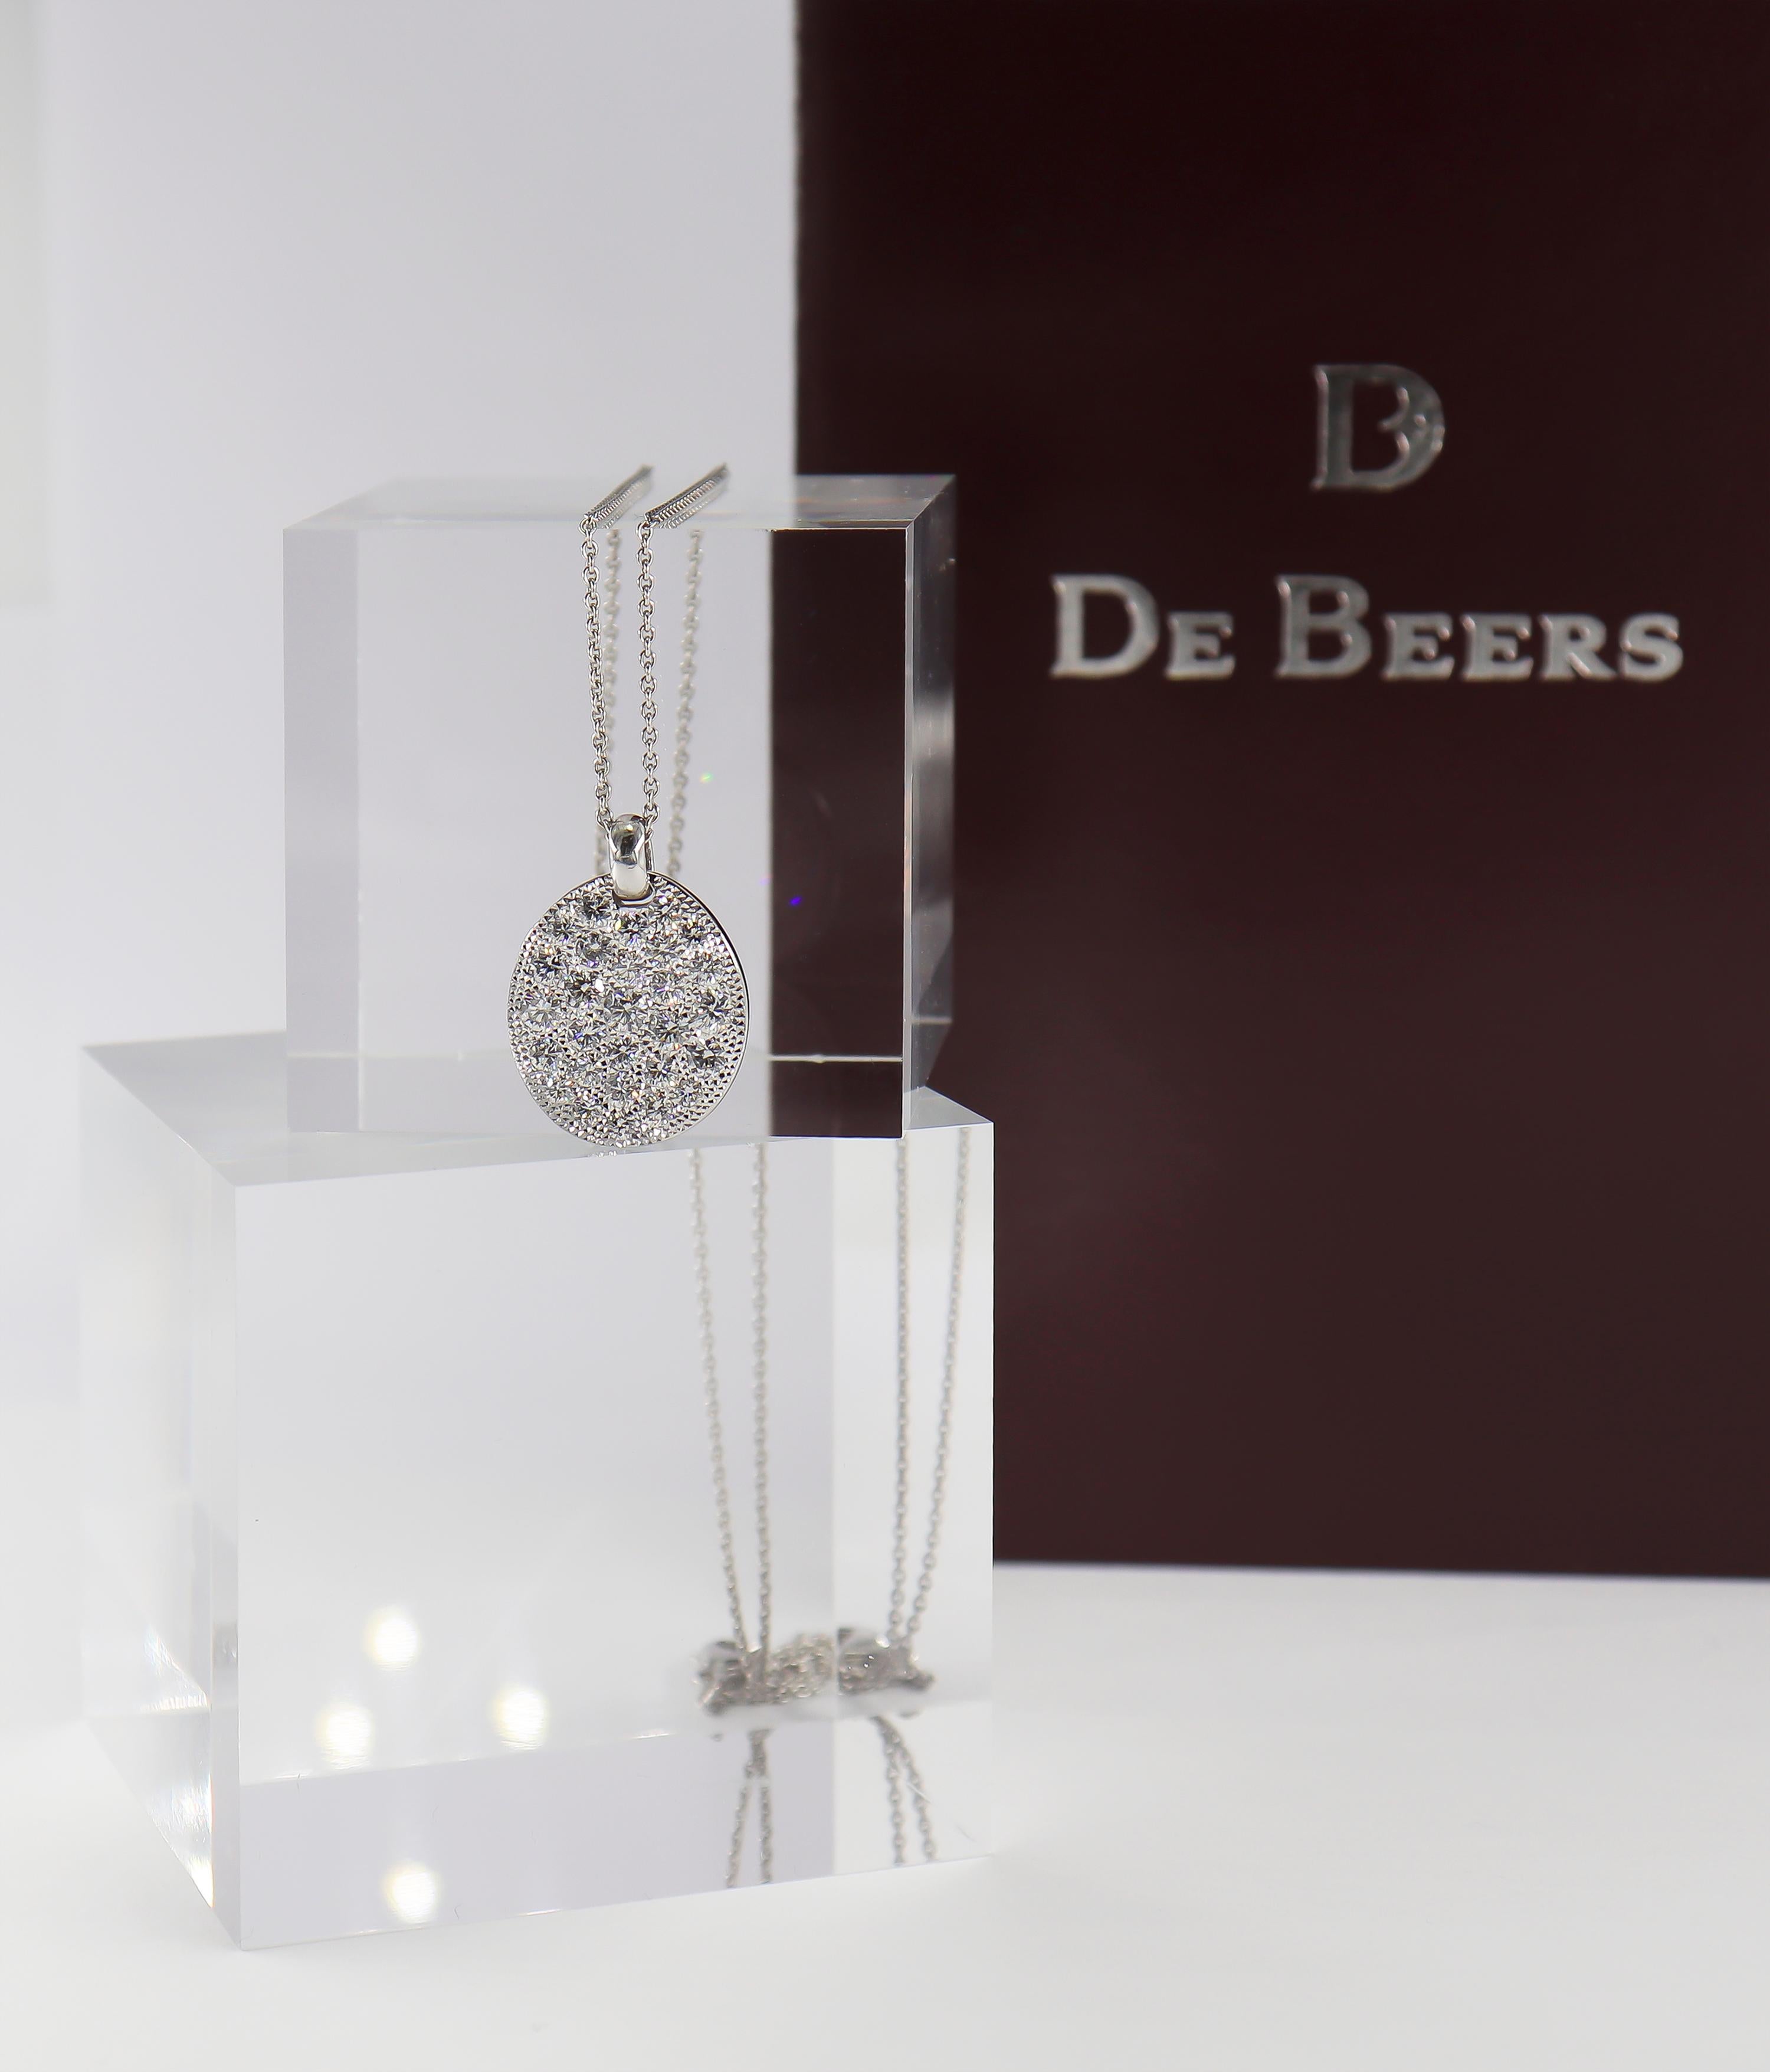 Contemporary De Beers Talisman Collection Diamond Pendant Necklace = 1.38 Carat Total Weight